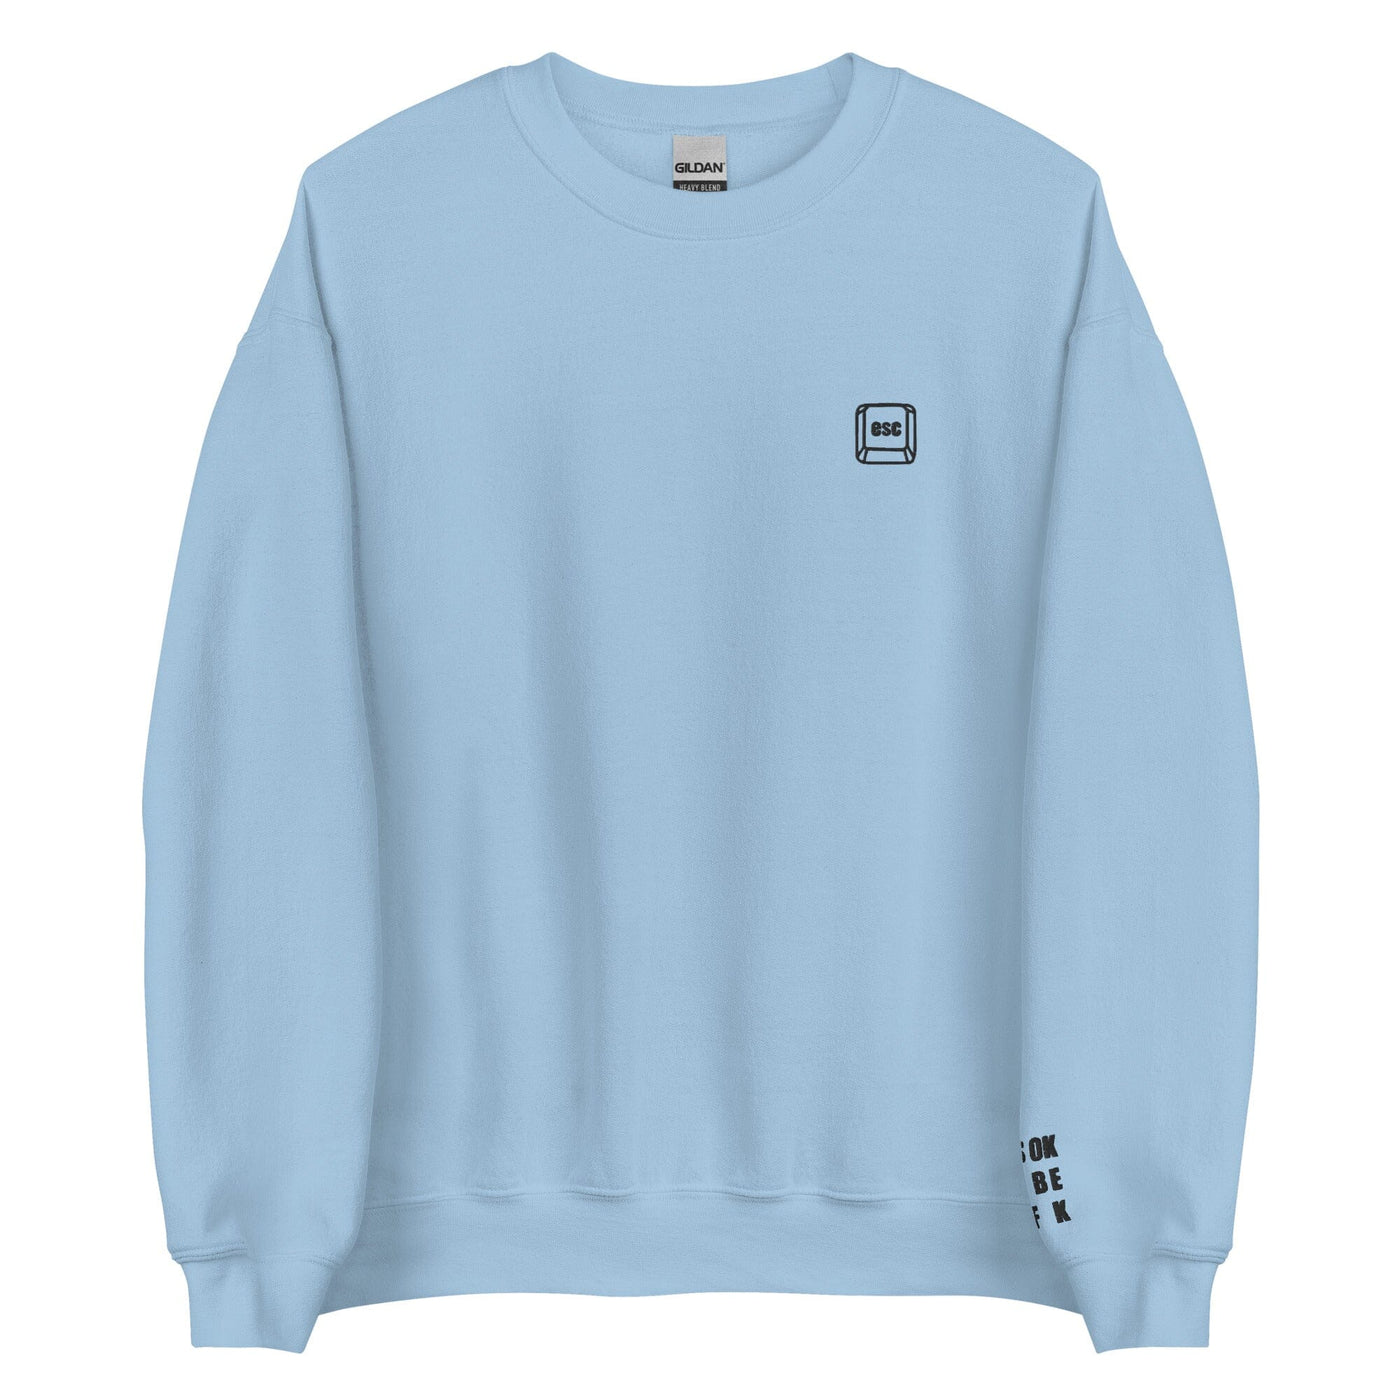 It's Ok to be AFK | Unisex Sweatshirt | Gamer Affirmations Threads & Thistles Inventory Light Blue S 